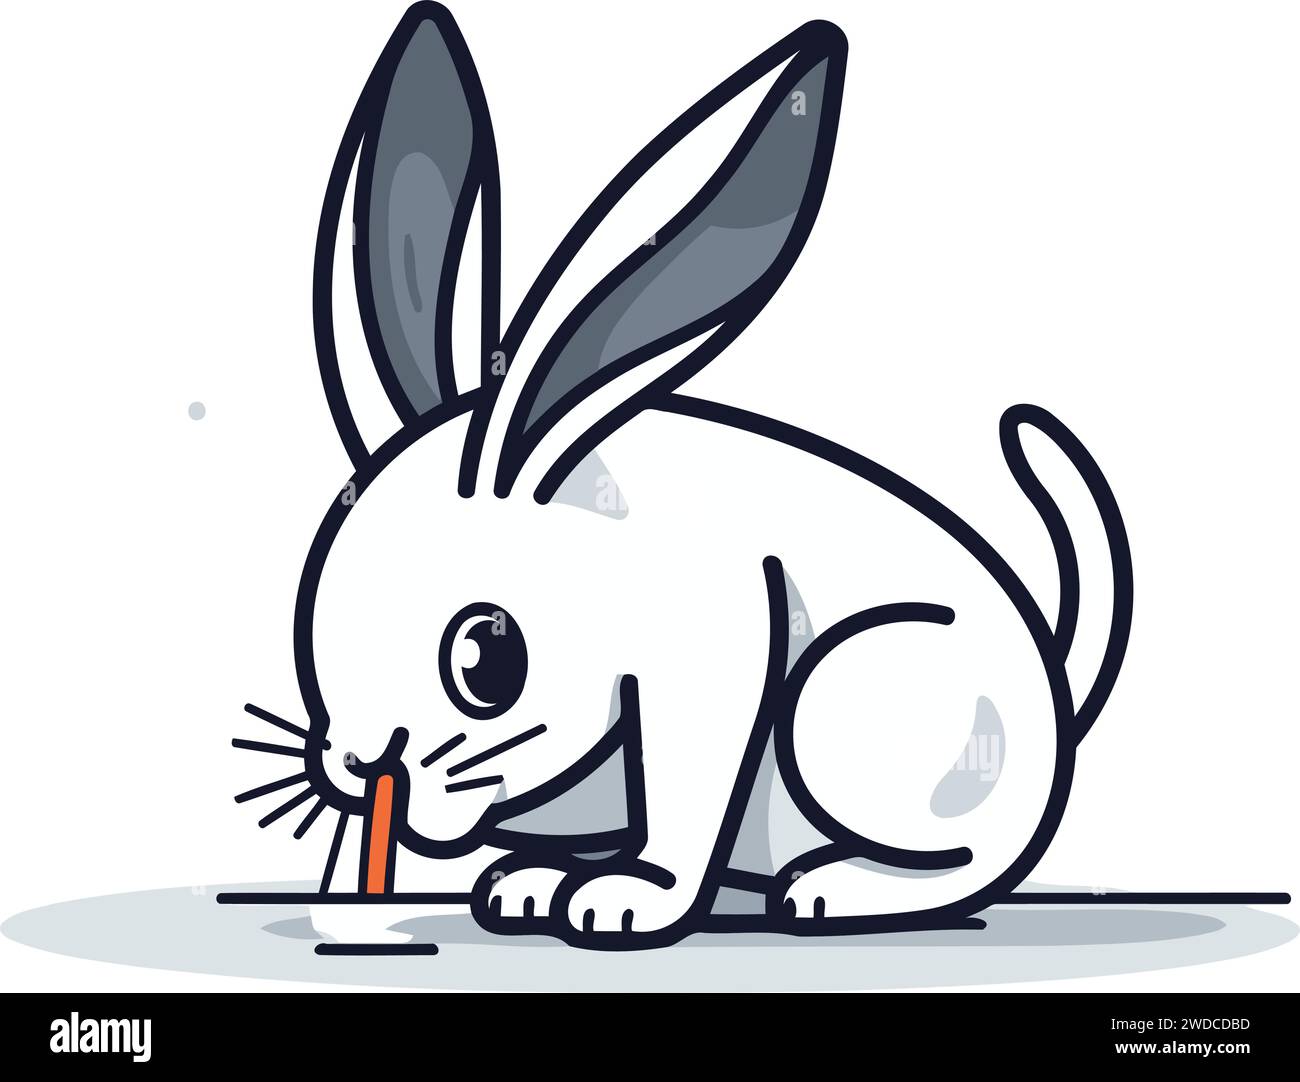 Rabbit eating carrot. Vector illustration of a cute rabbit eating carrot. Stock Vector